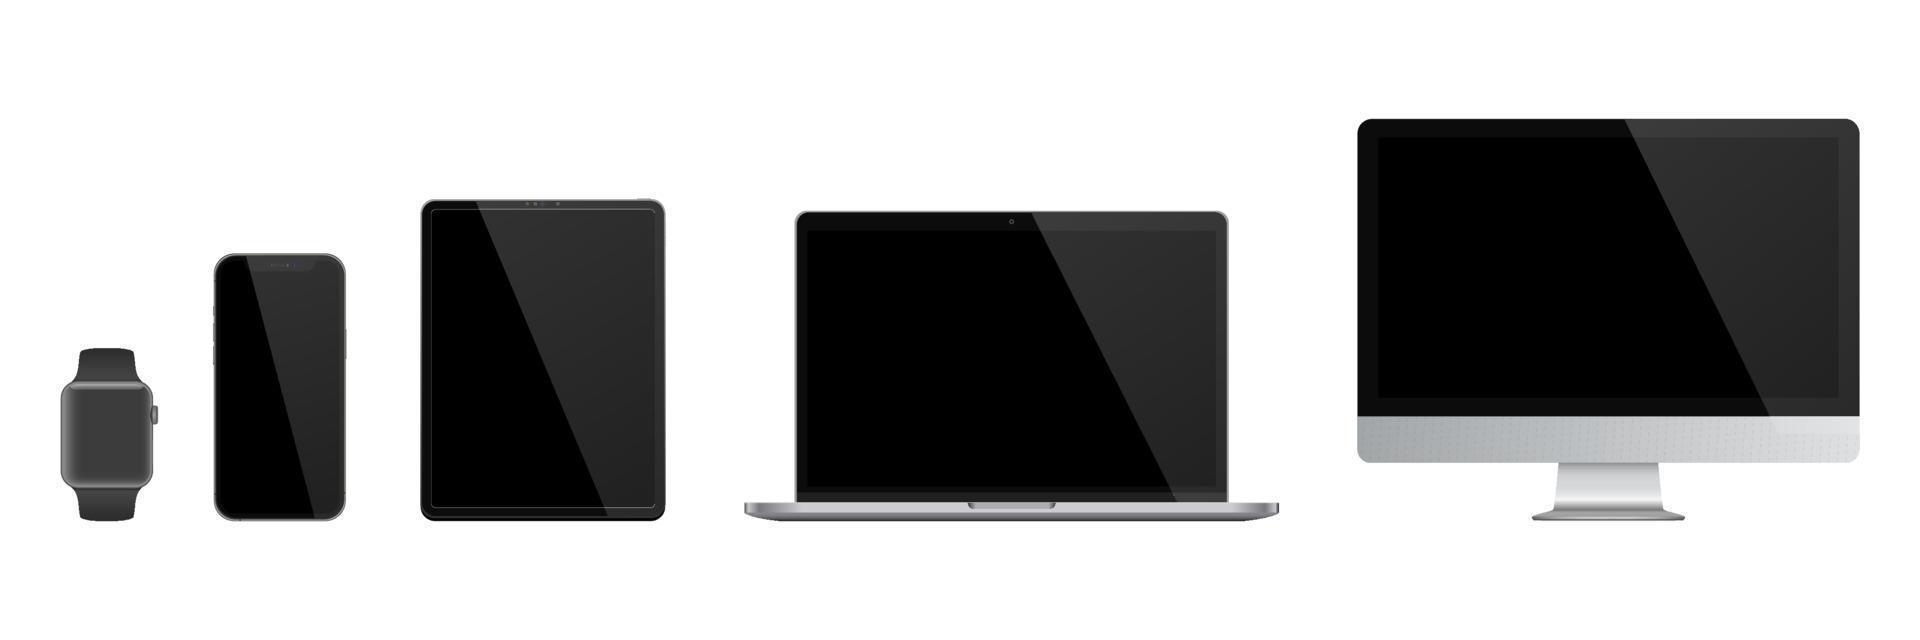 Realistic set of Monitor, laptop, tablet, smartphone, smartwatch. Vector illustration